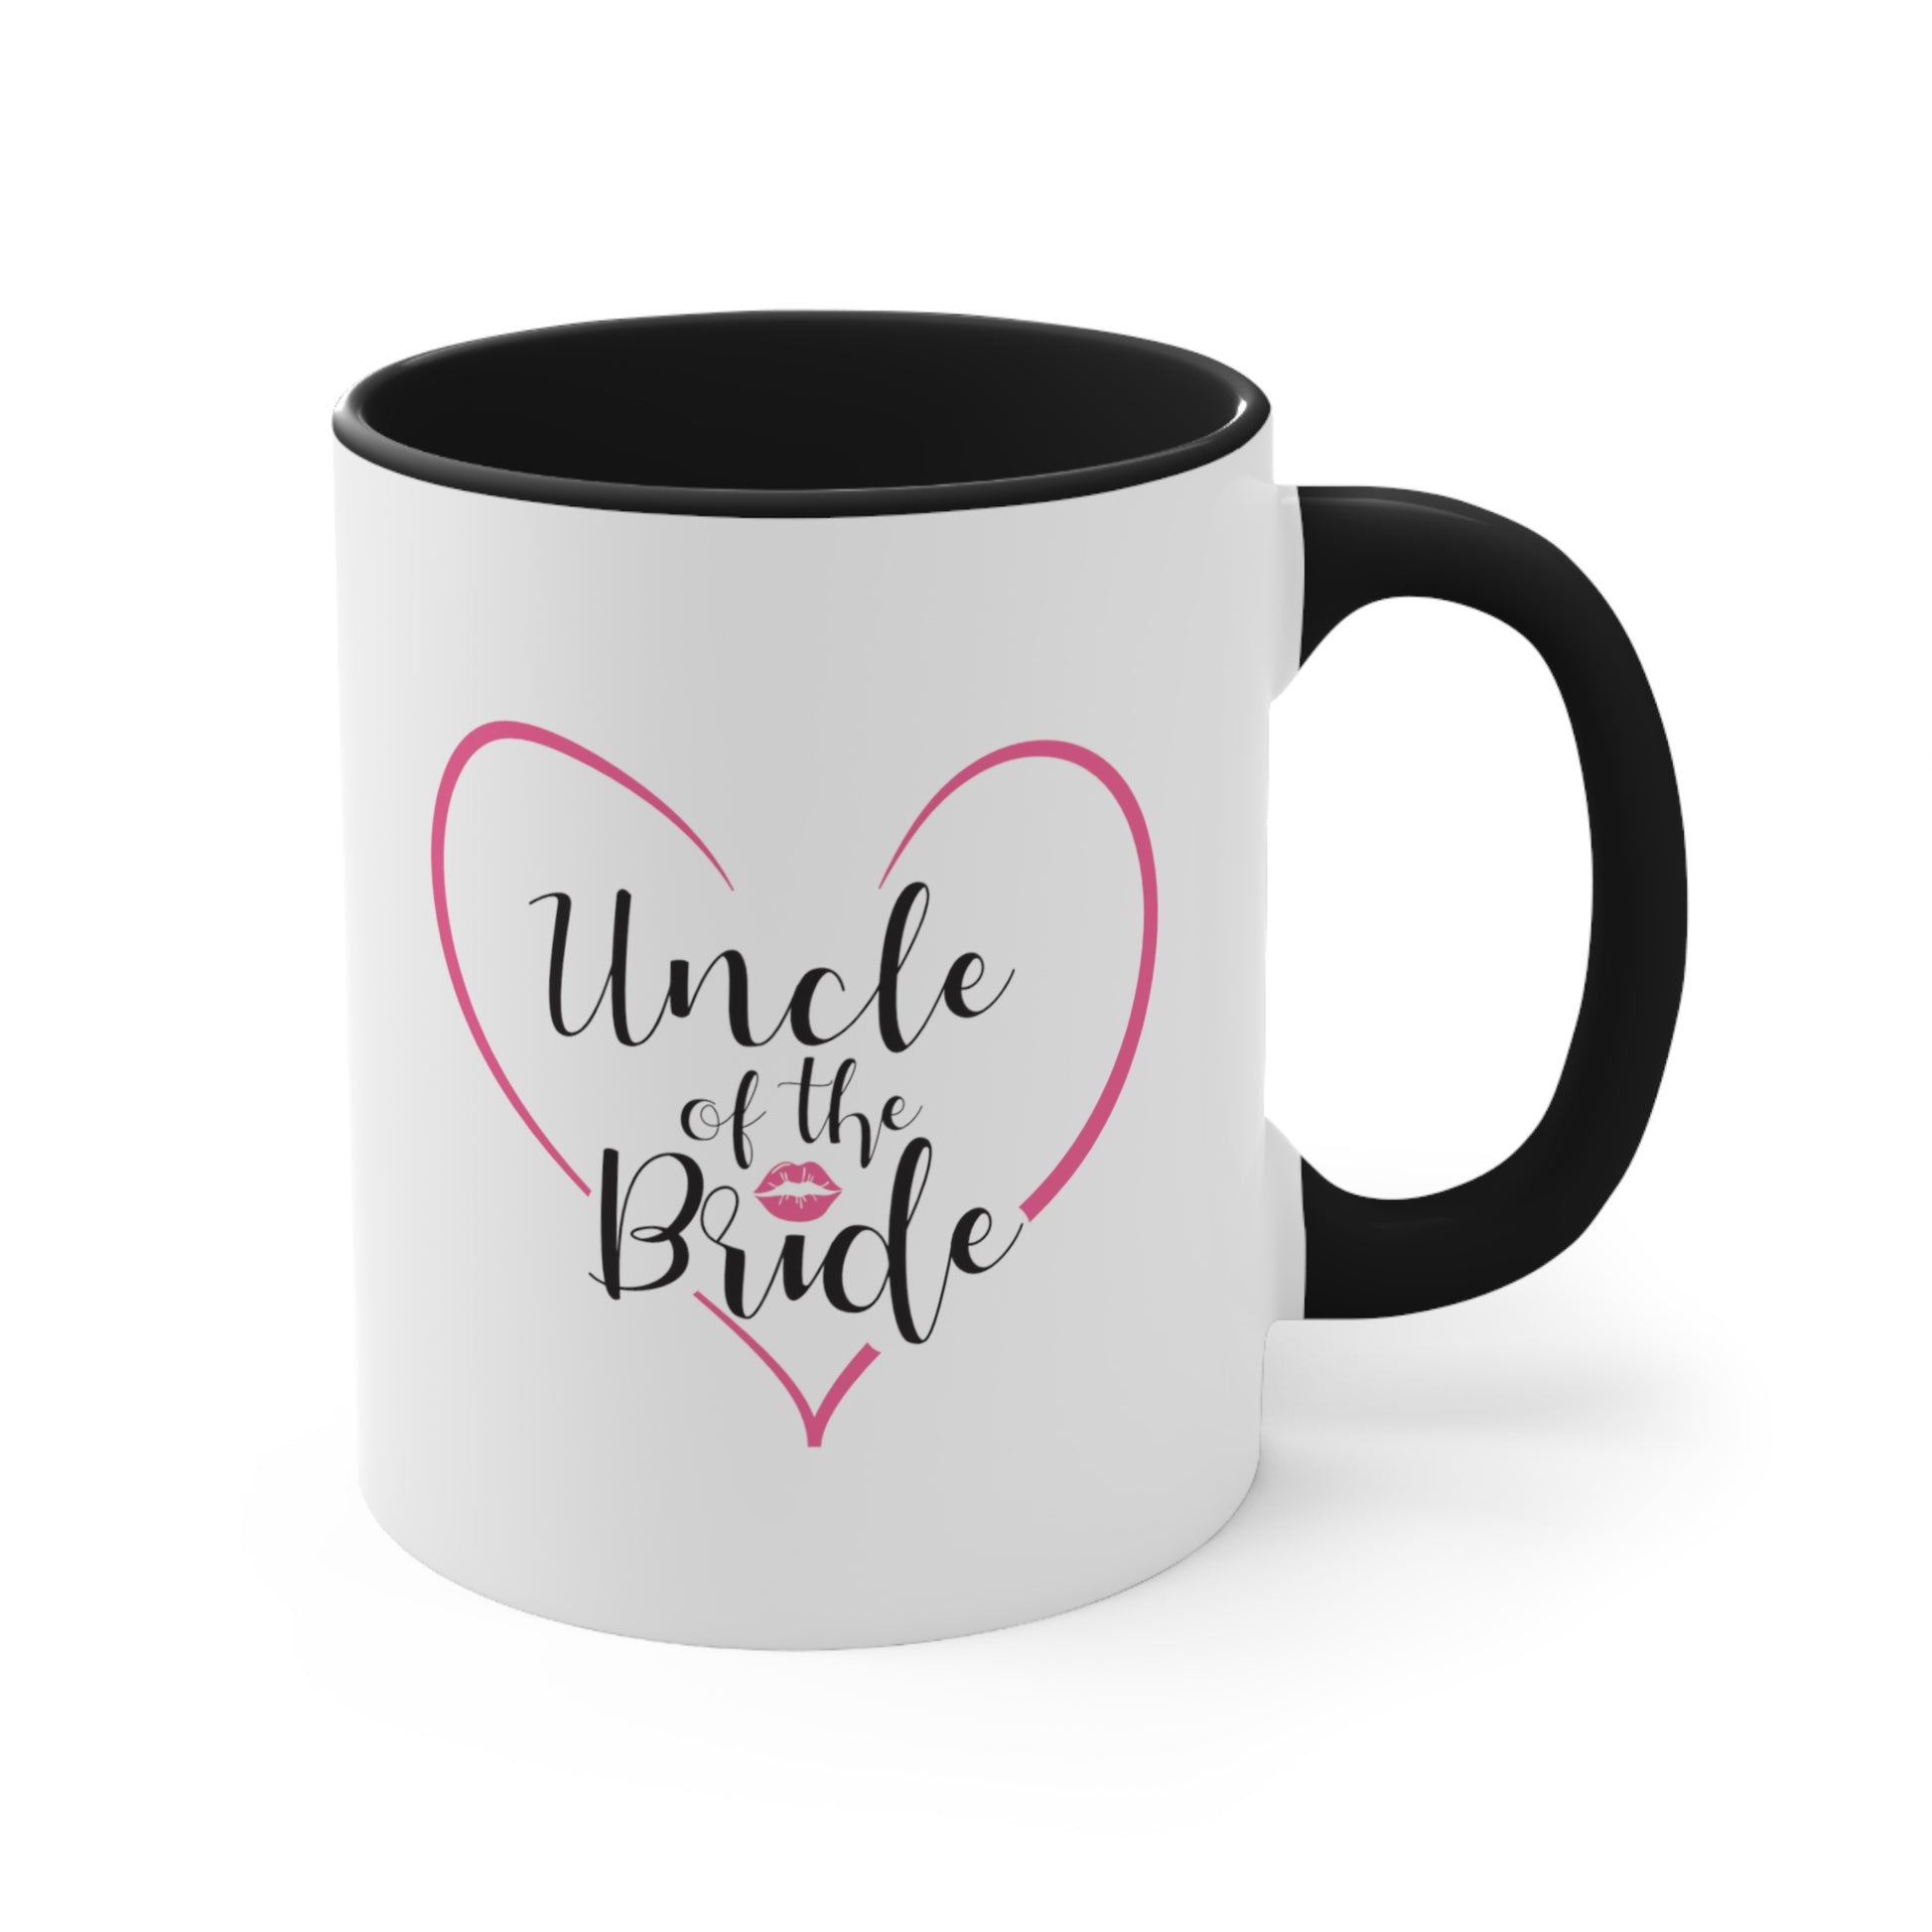 Uncle of the Bride Coffee Mug - Double Sided Black Accent Ceramic 11oz by TheGlassyLass.com